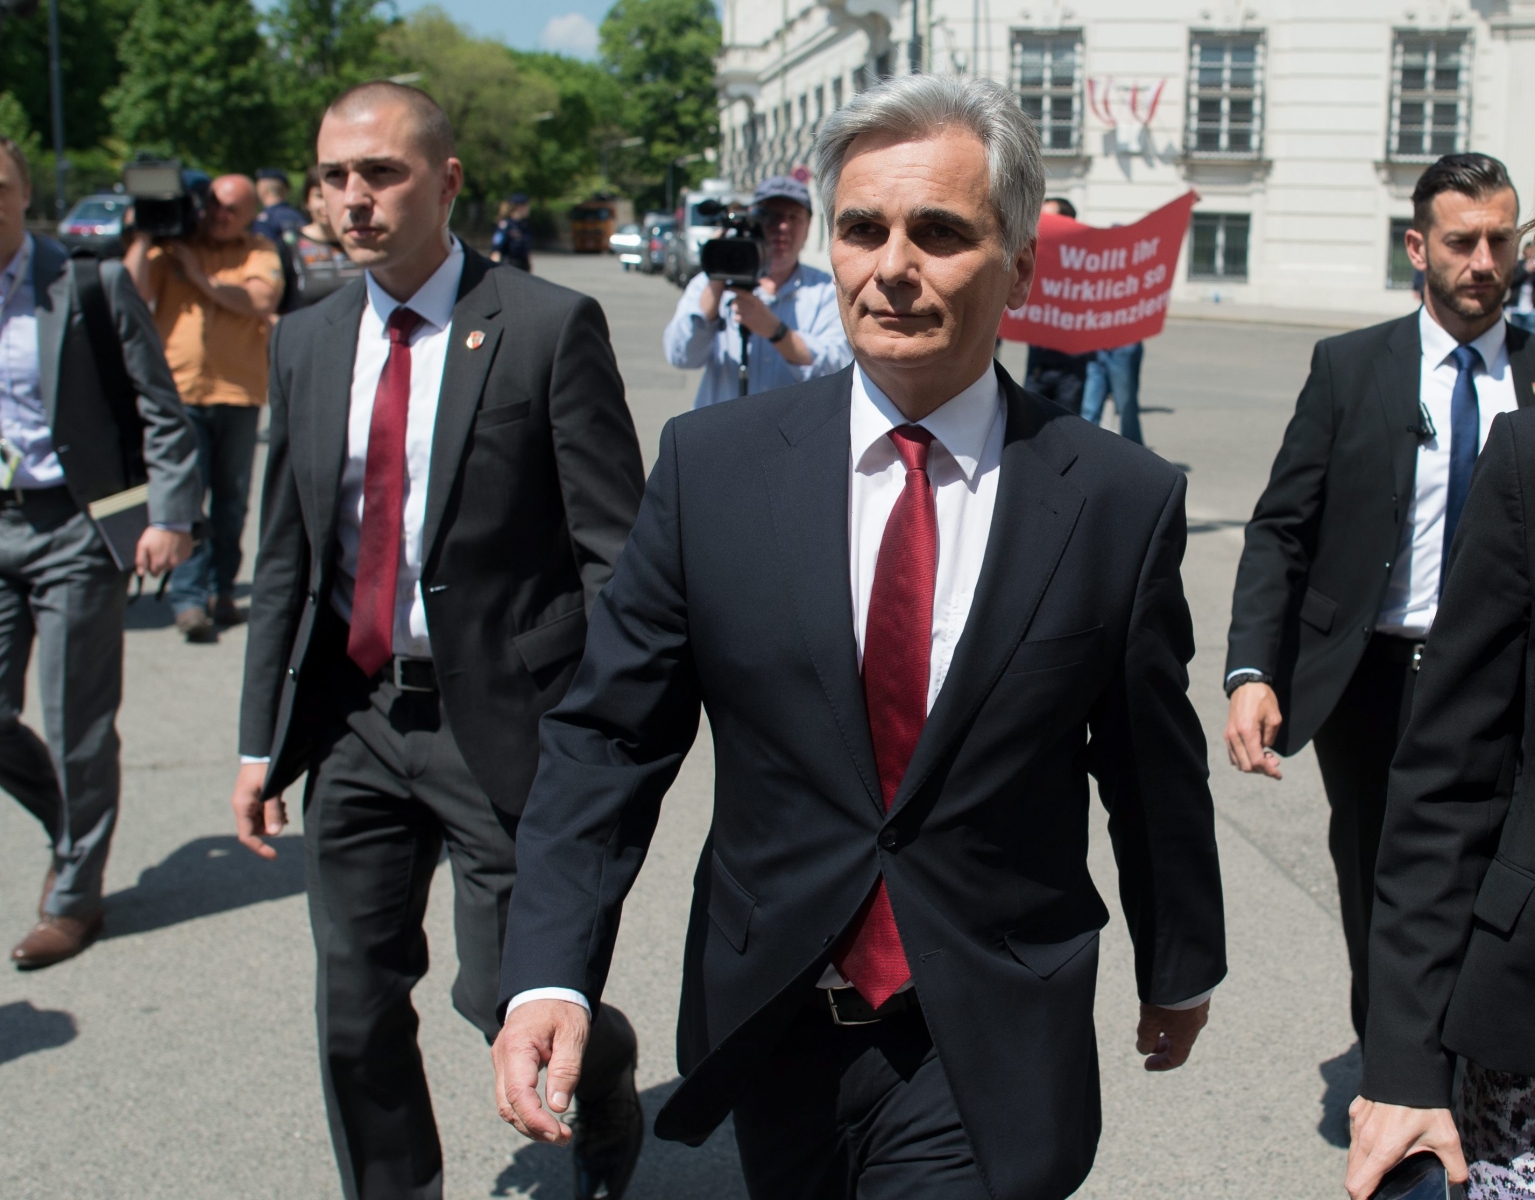 epa05296170 Austrian Chancellor Werner Faymann (C), in Vienna, Austria, 09 May 2016. Feymann handed in his resignation as Chancellor coming after the Social Democratic Party of Austria (SPO) had  poor results in the recent presidential vote, and with calls for the SPO to cooperate with Austrian anti immigration far right parties.  EPA/CHRISTIAN BRUNER AUSTRIA WERNER FEYMANN RESIGNS